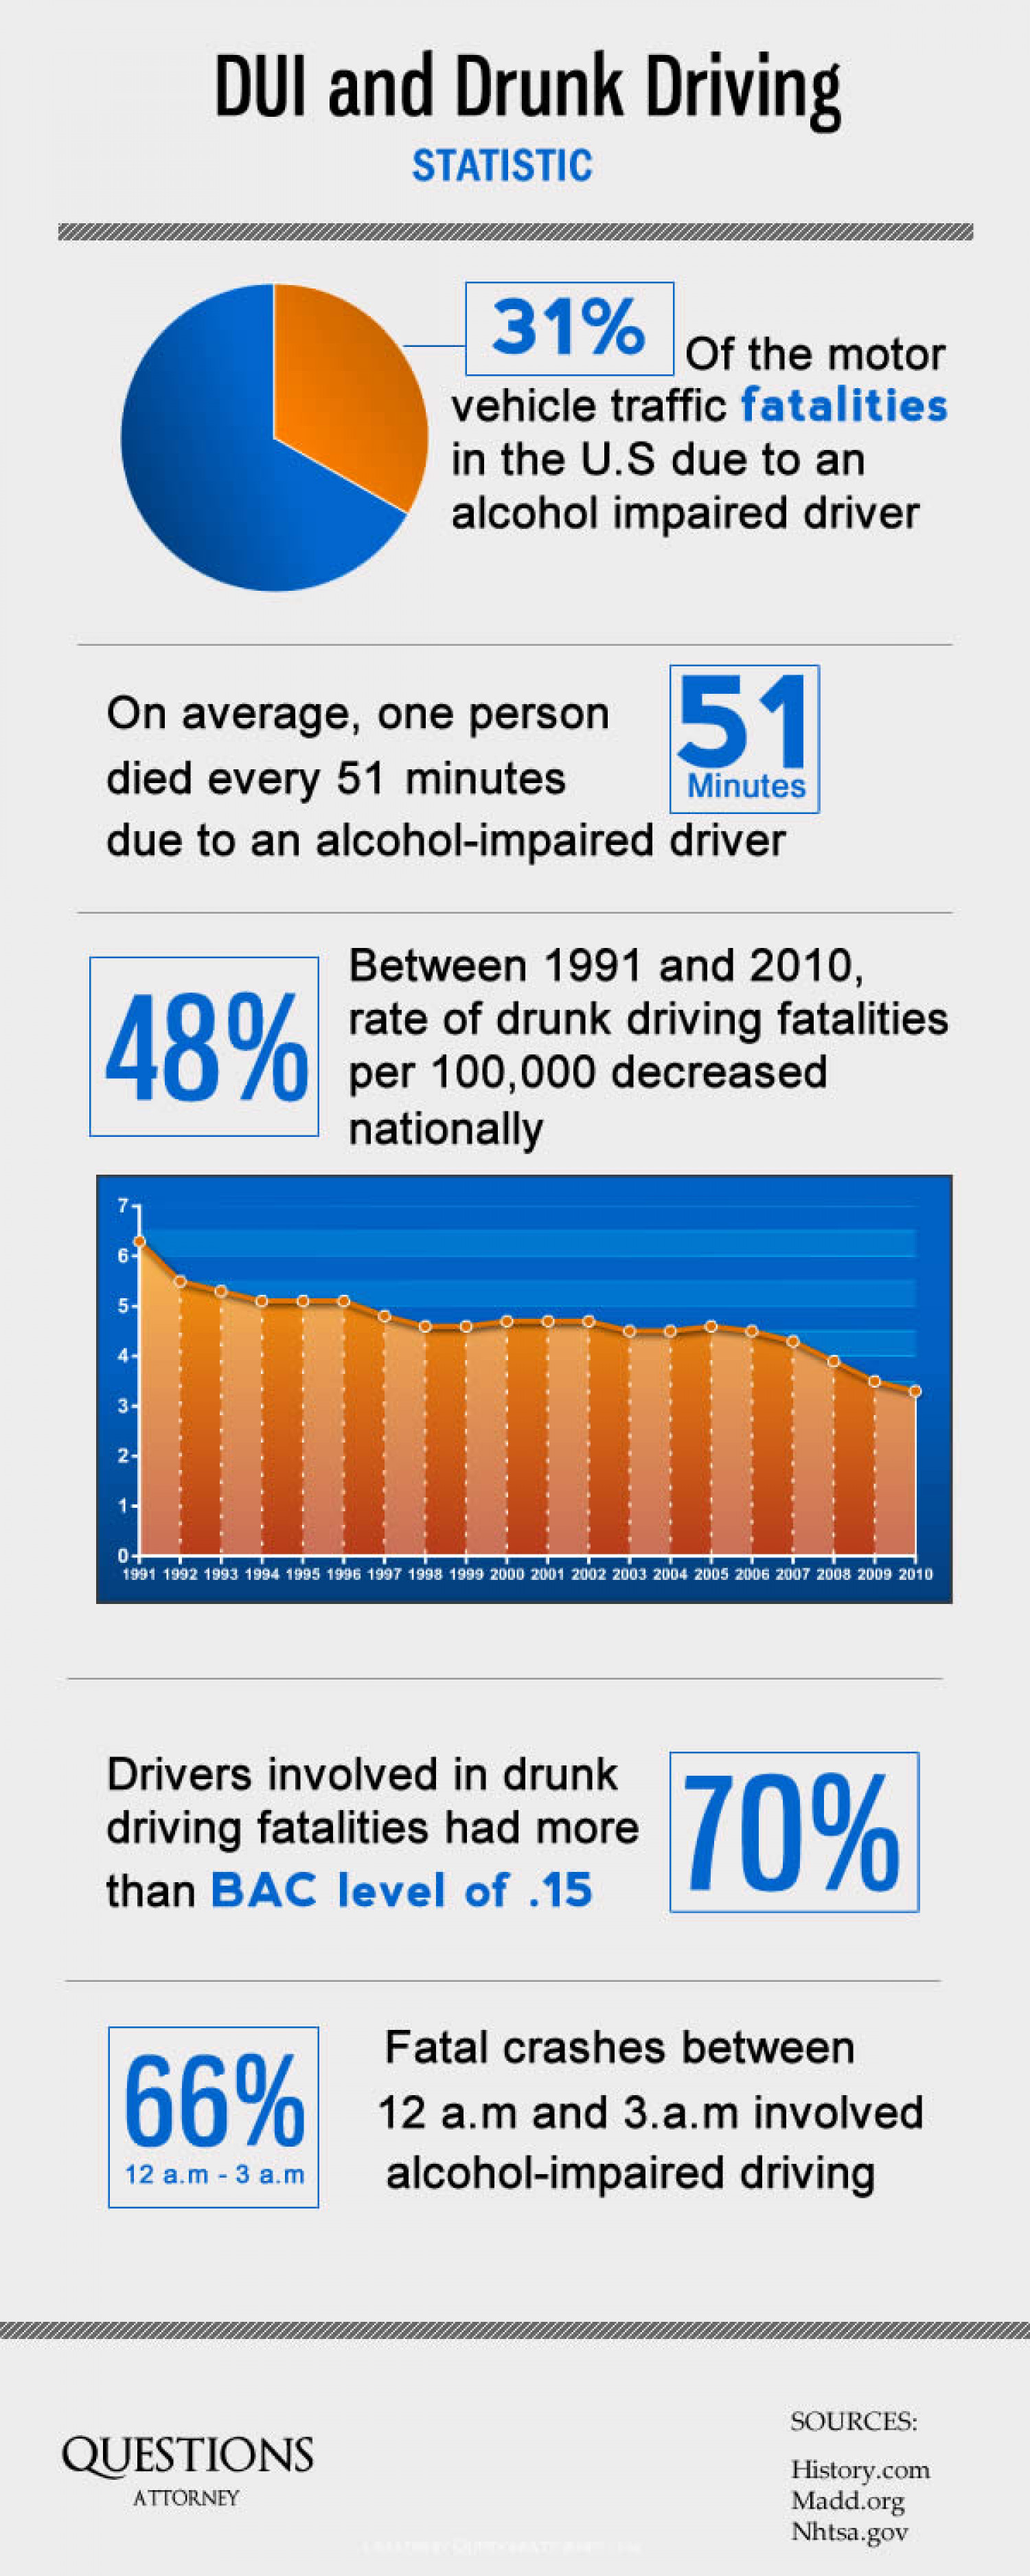 DUI and Drunk Driving Statistic Infographic